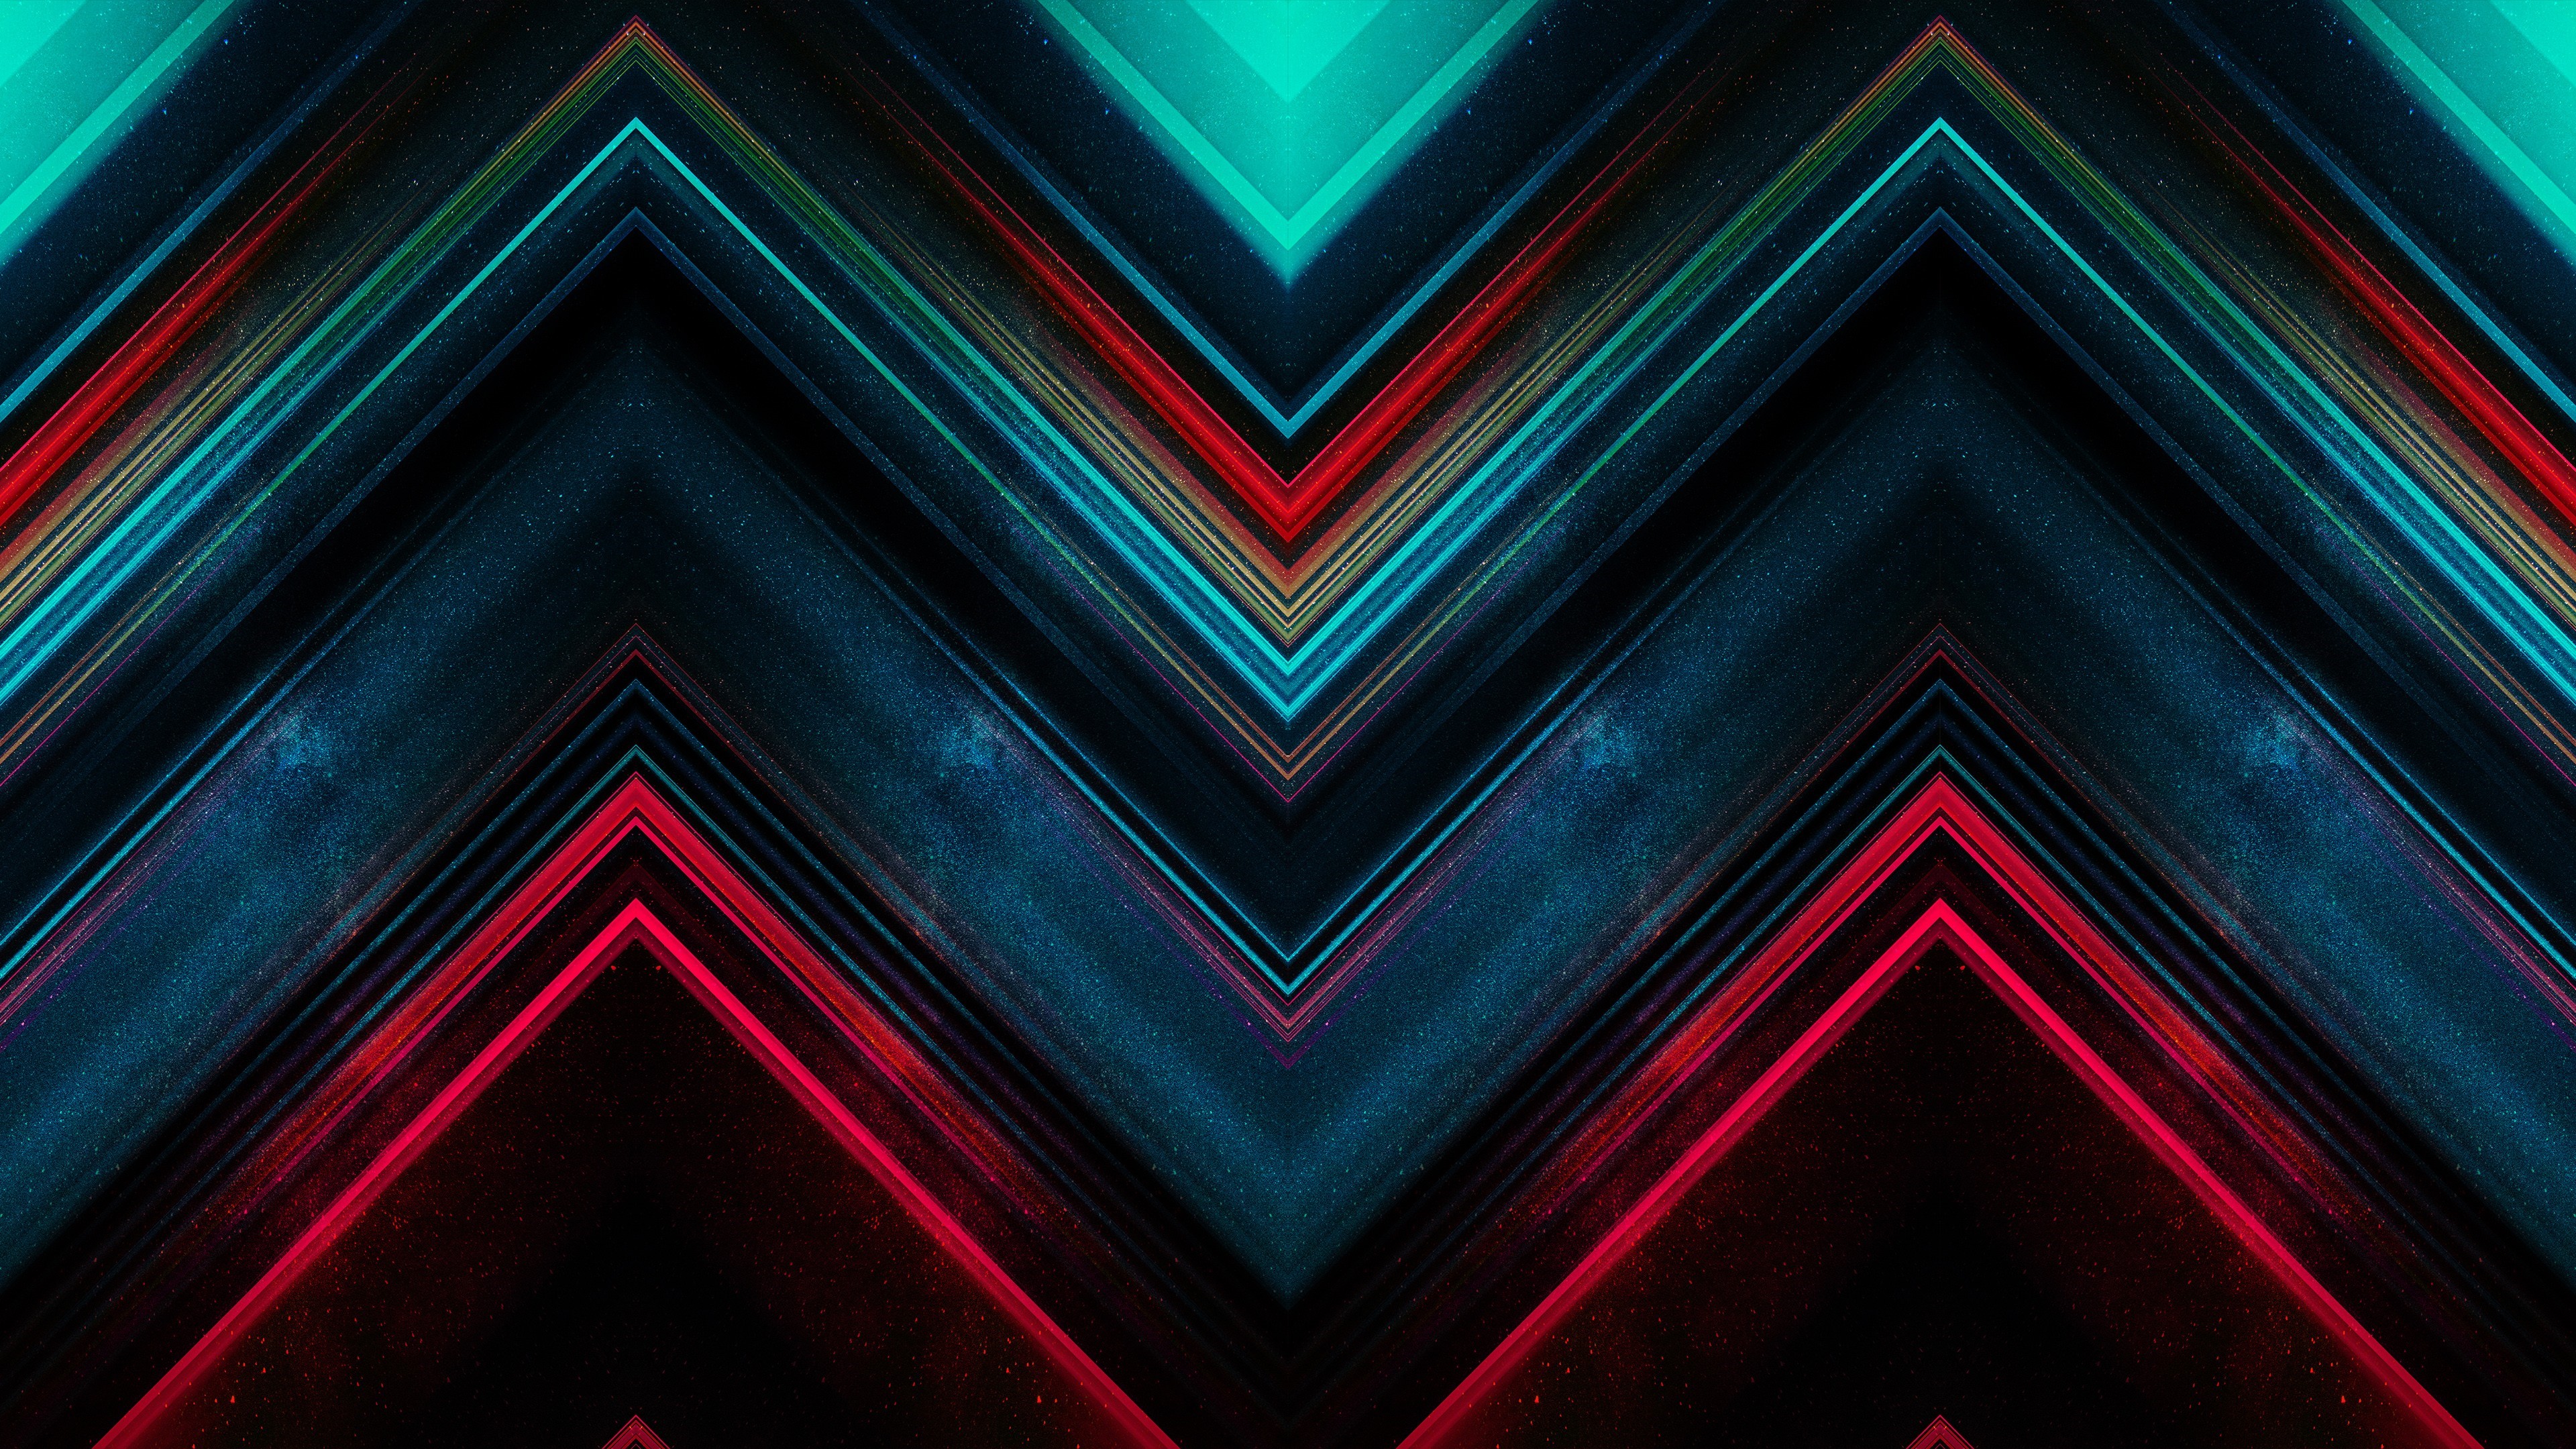 Abstract Symmetry Wallpapers